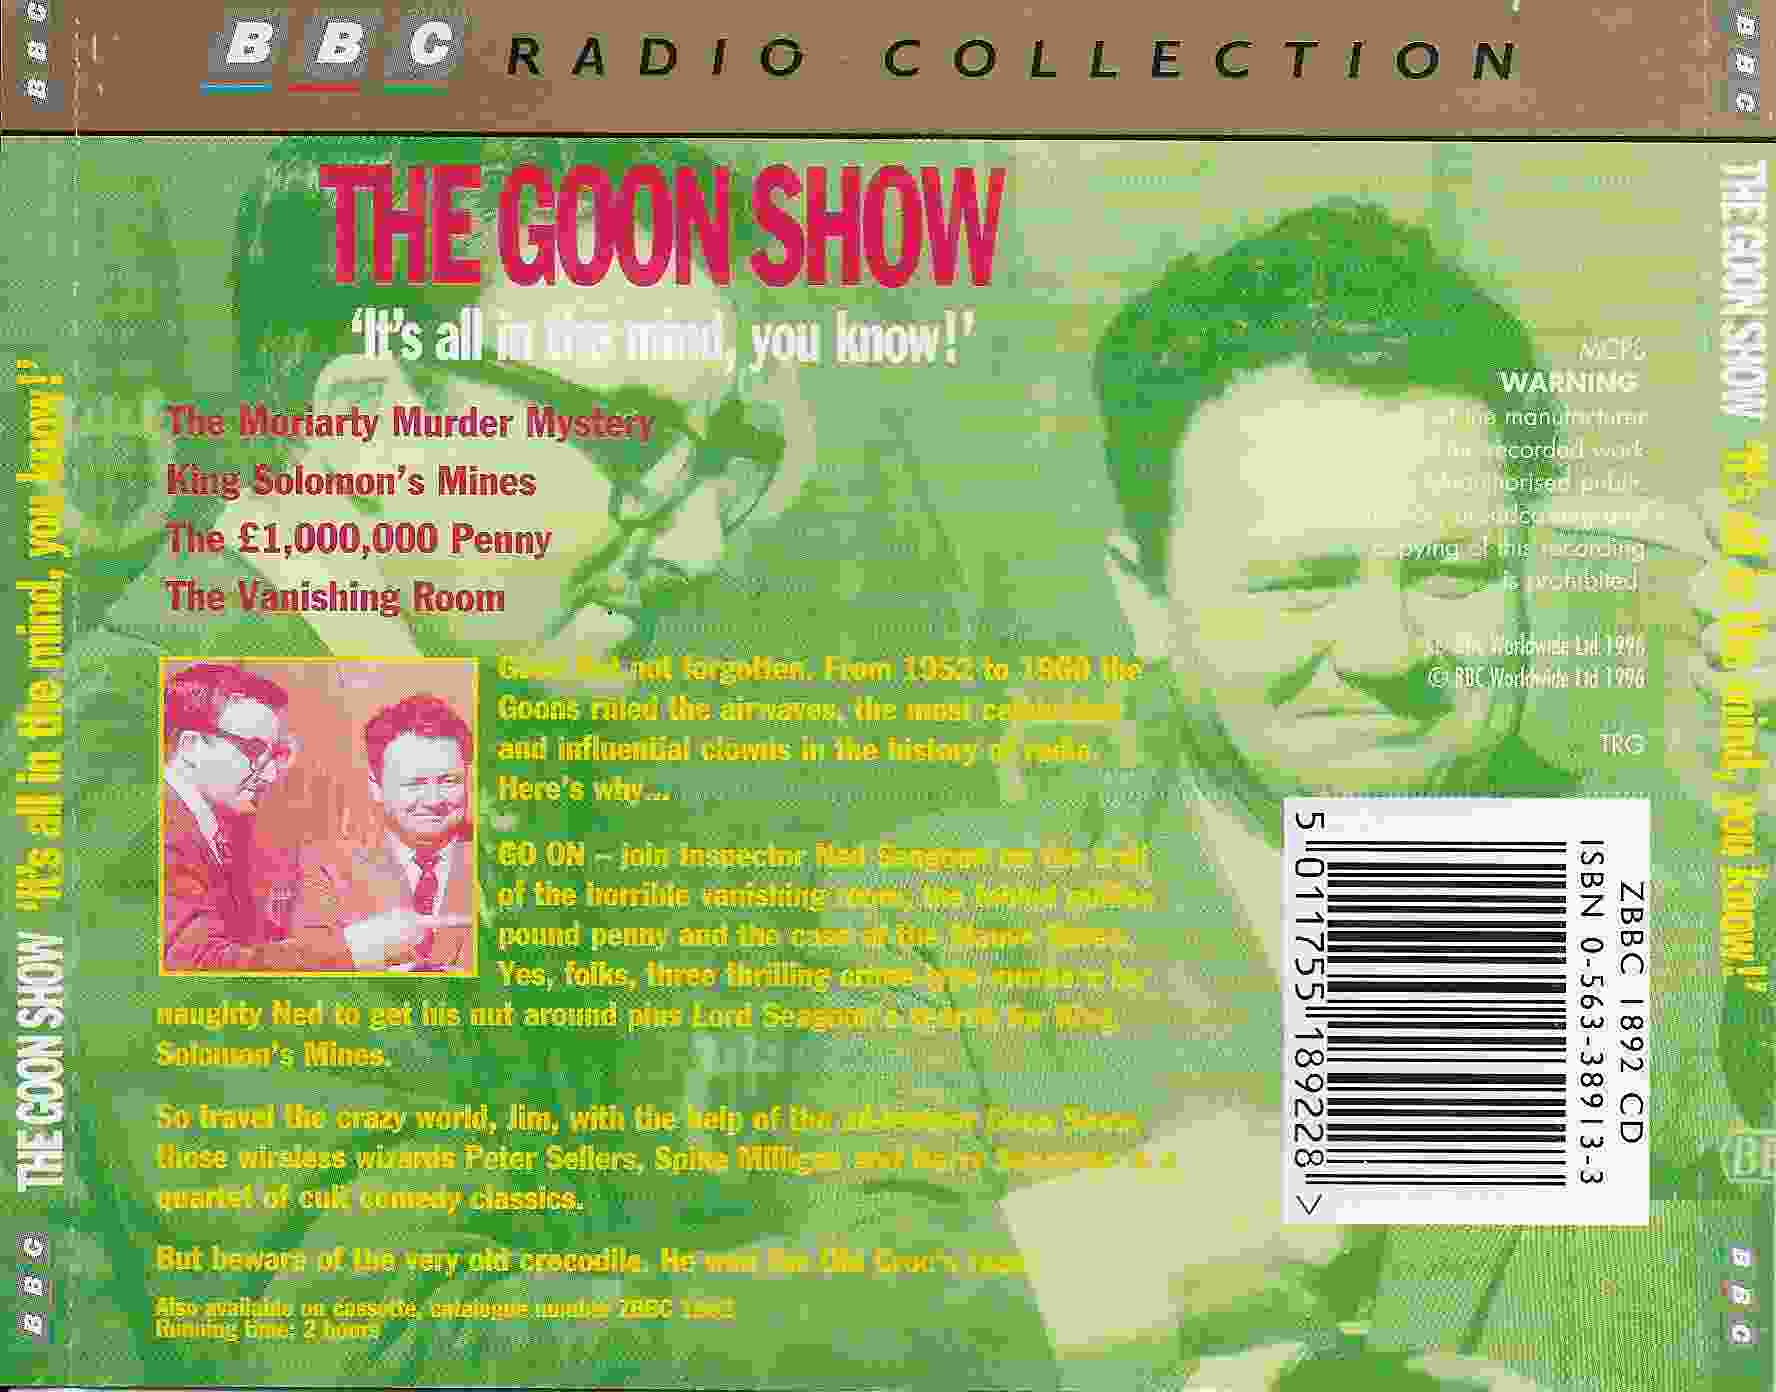 Picture of ZBBC 1892 CD The Goon show 13 - It's all in the mind, you know! by artist Spike Milligan / Larry Stephens from the BBC records and Tapes library